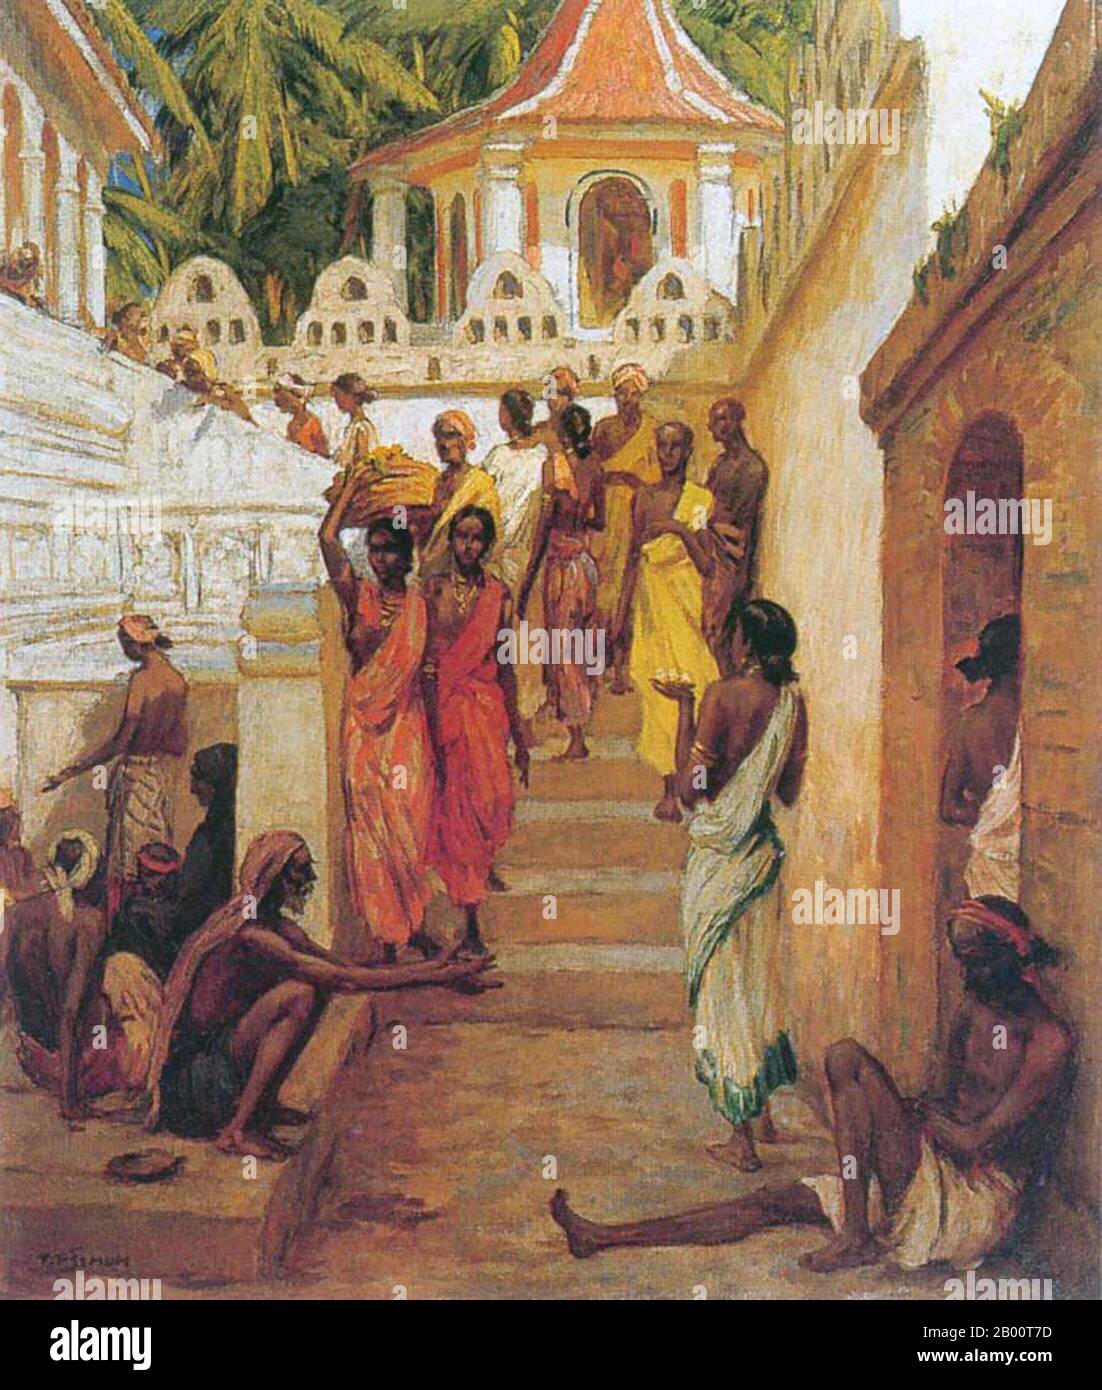 Sri Lanka/Czechoslovakia: 'Sinhalese on the Steps of the Temple of the Tooth, Kandy'. Painting by T. F. Simon (1877-1942), c. 1928.  Tavik Frantisek Simon (1877–1942), was a Czech painter, etcher, and woodcut artist. Although based mainly in Europe, his extensive travels took him to Morocco, Ceylon (now Sri Lanka), India, and Japan, images of all of which appear in his  artistic work. He died in Prague in 1942. Largely ignored during the Communist era in Czechoslovakia, his work has received greater attention in recent years. Stock Photo